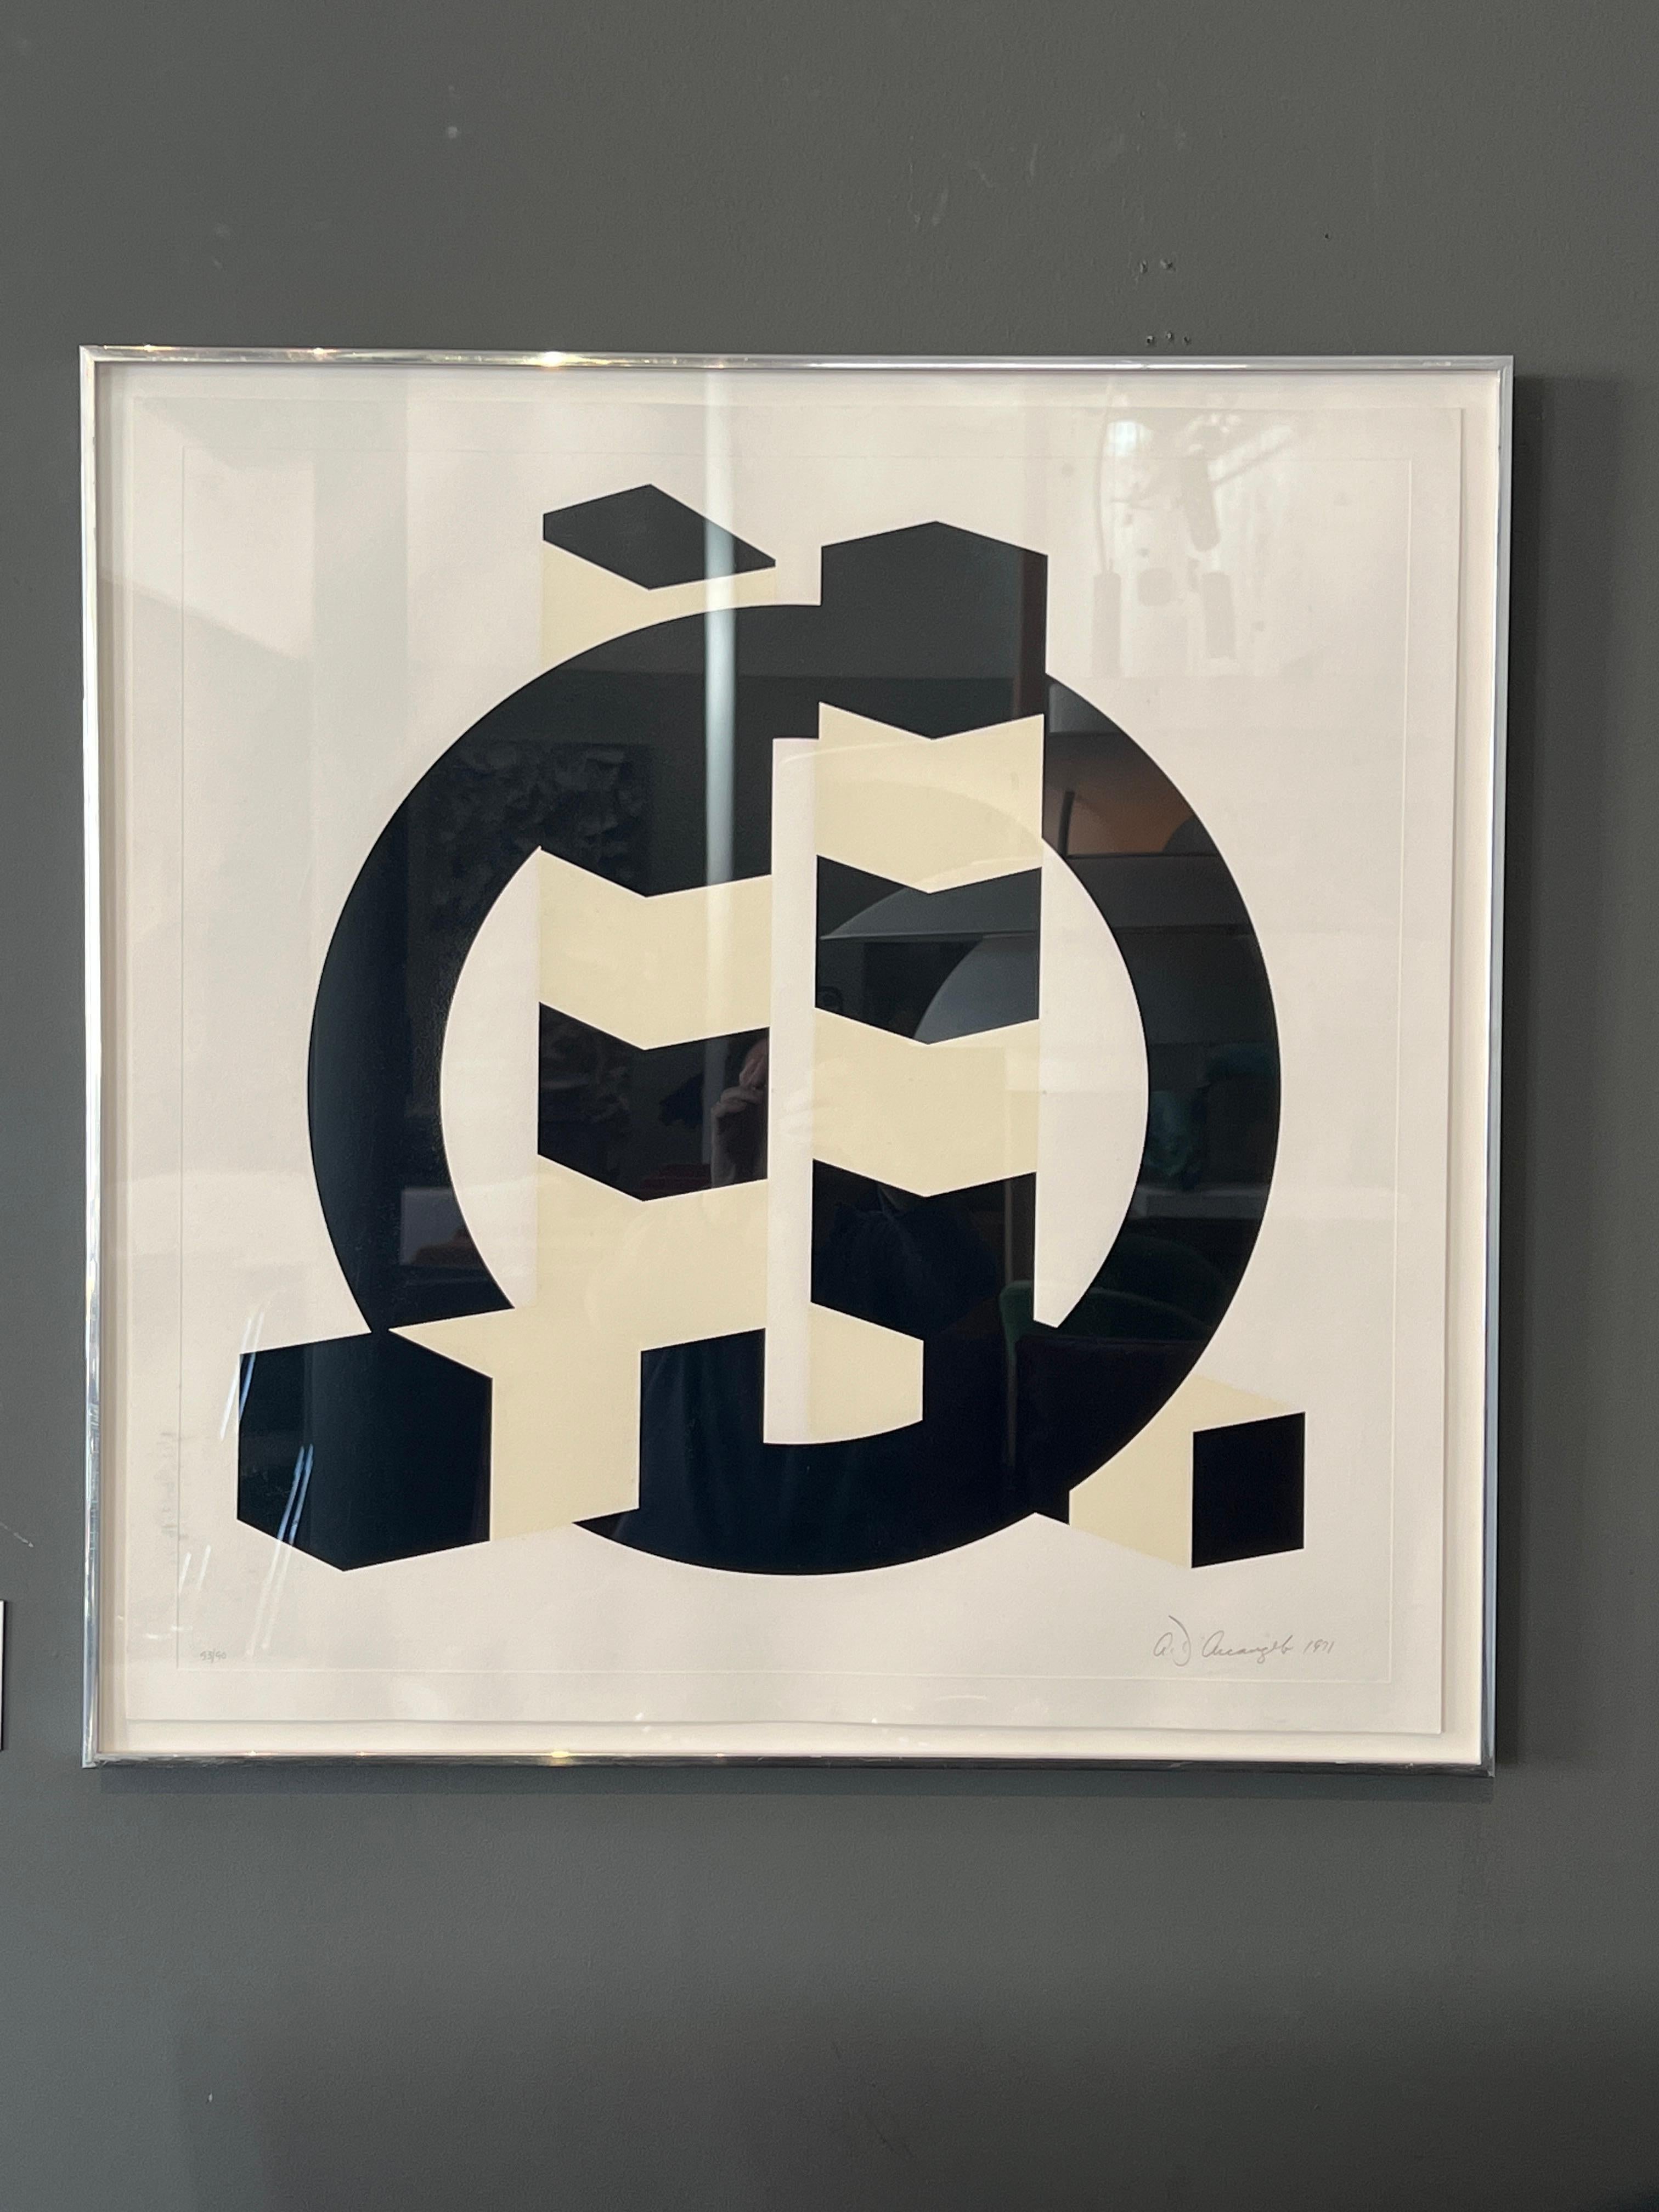 A signed and numbered lithograph by Allan D'Arcangelo titled 'Constelation 1' dated 1971.